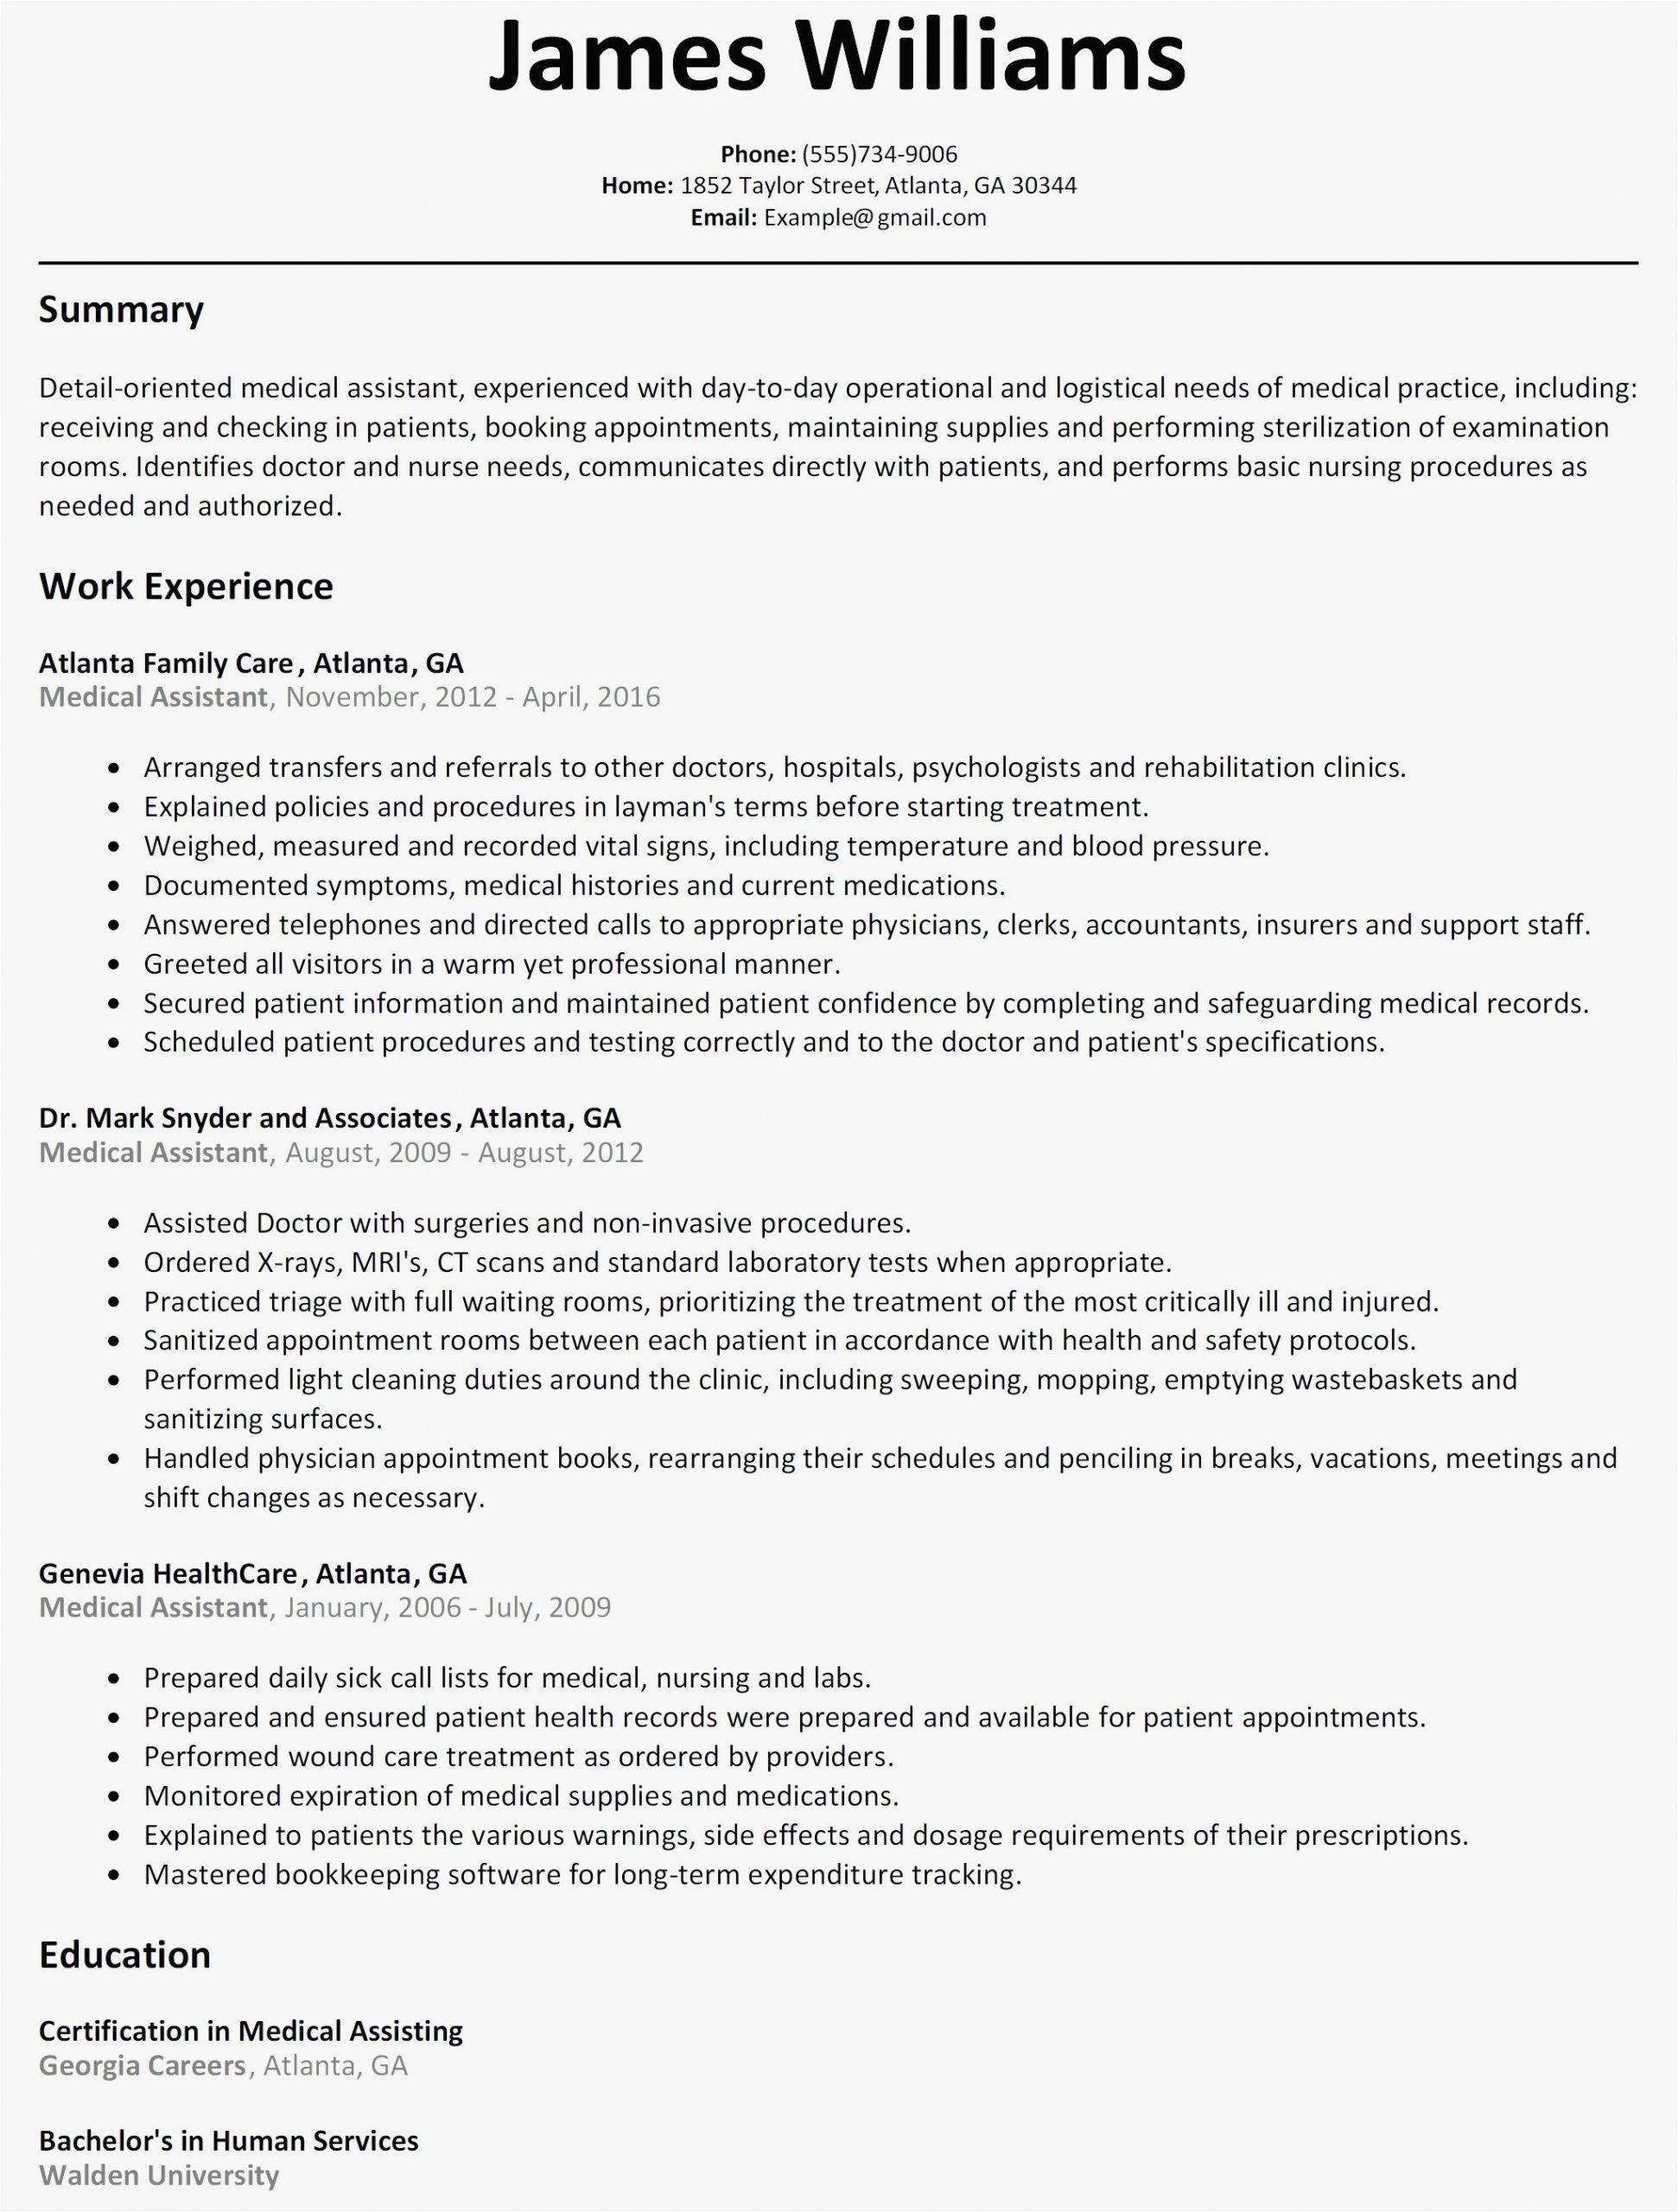 Sample Resume Cover Letter for Stay at Home Mom 12 Stay at Home Mom Resume Samples Radaircars